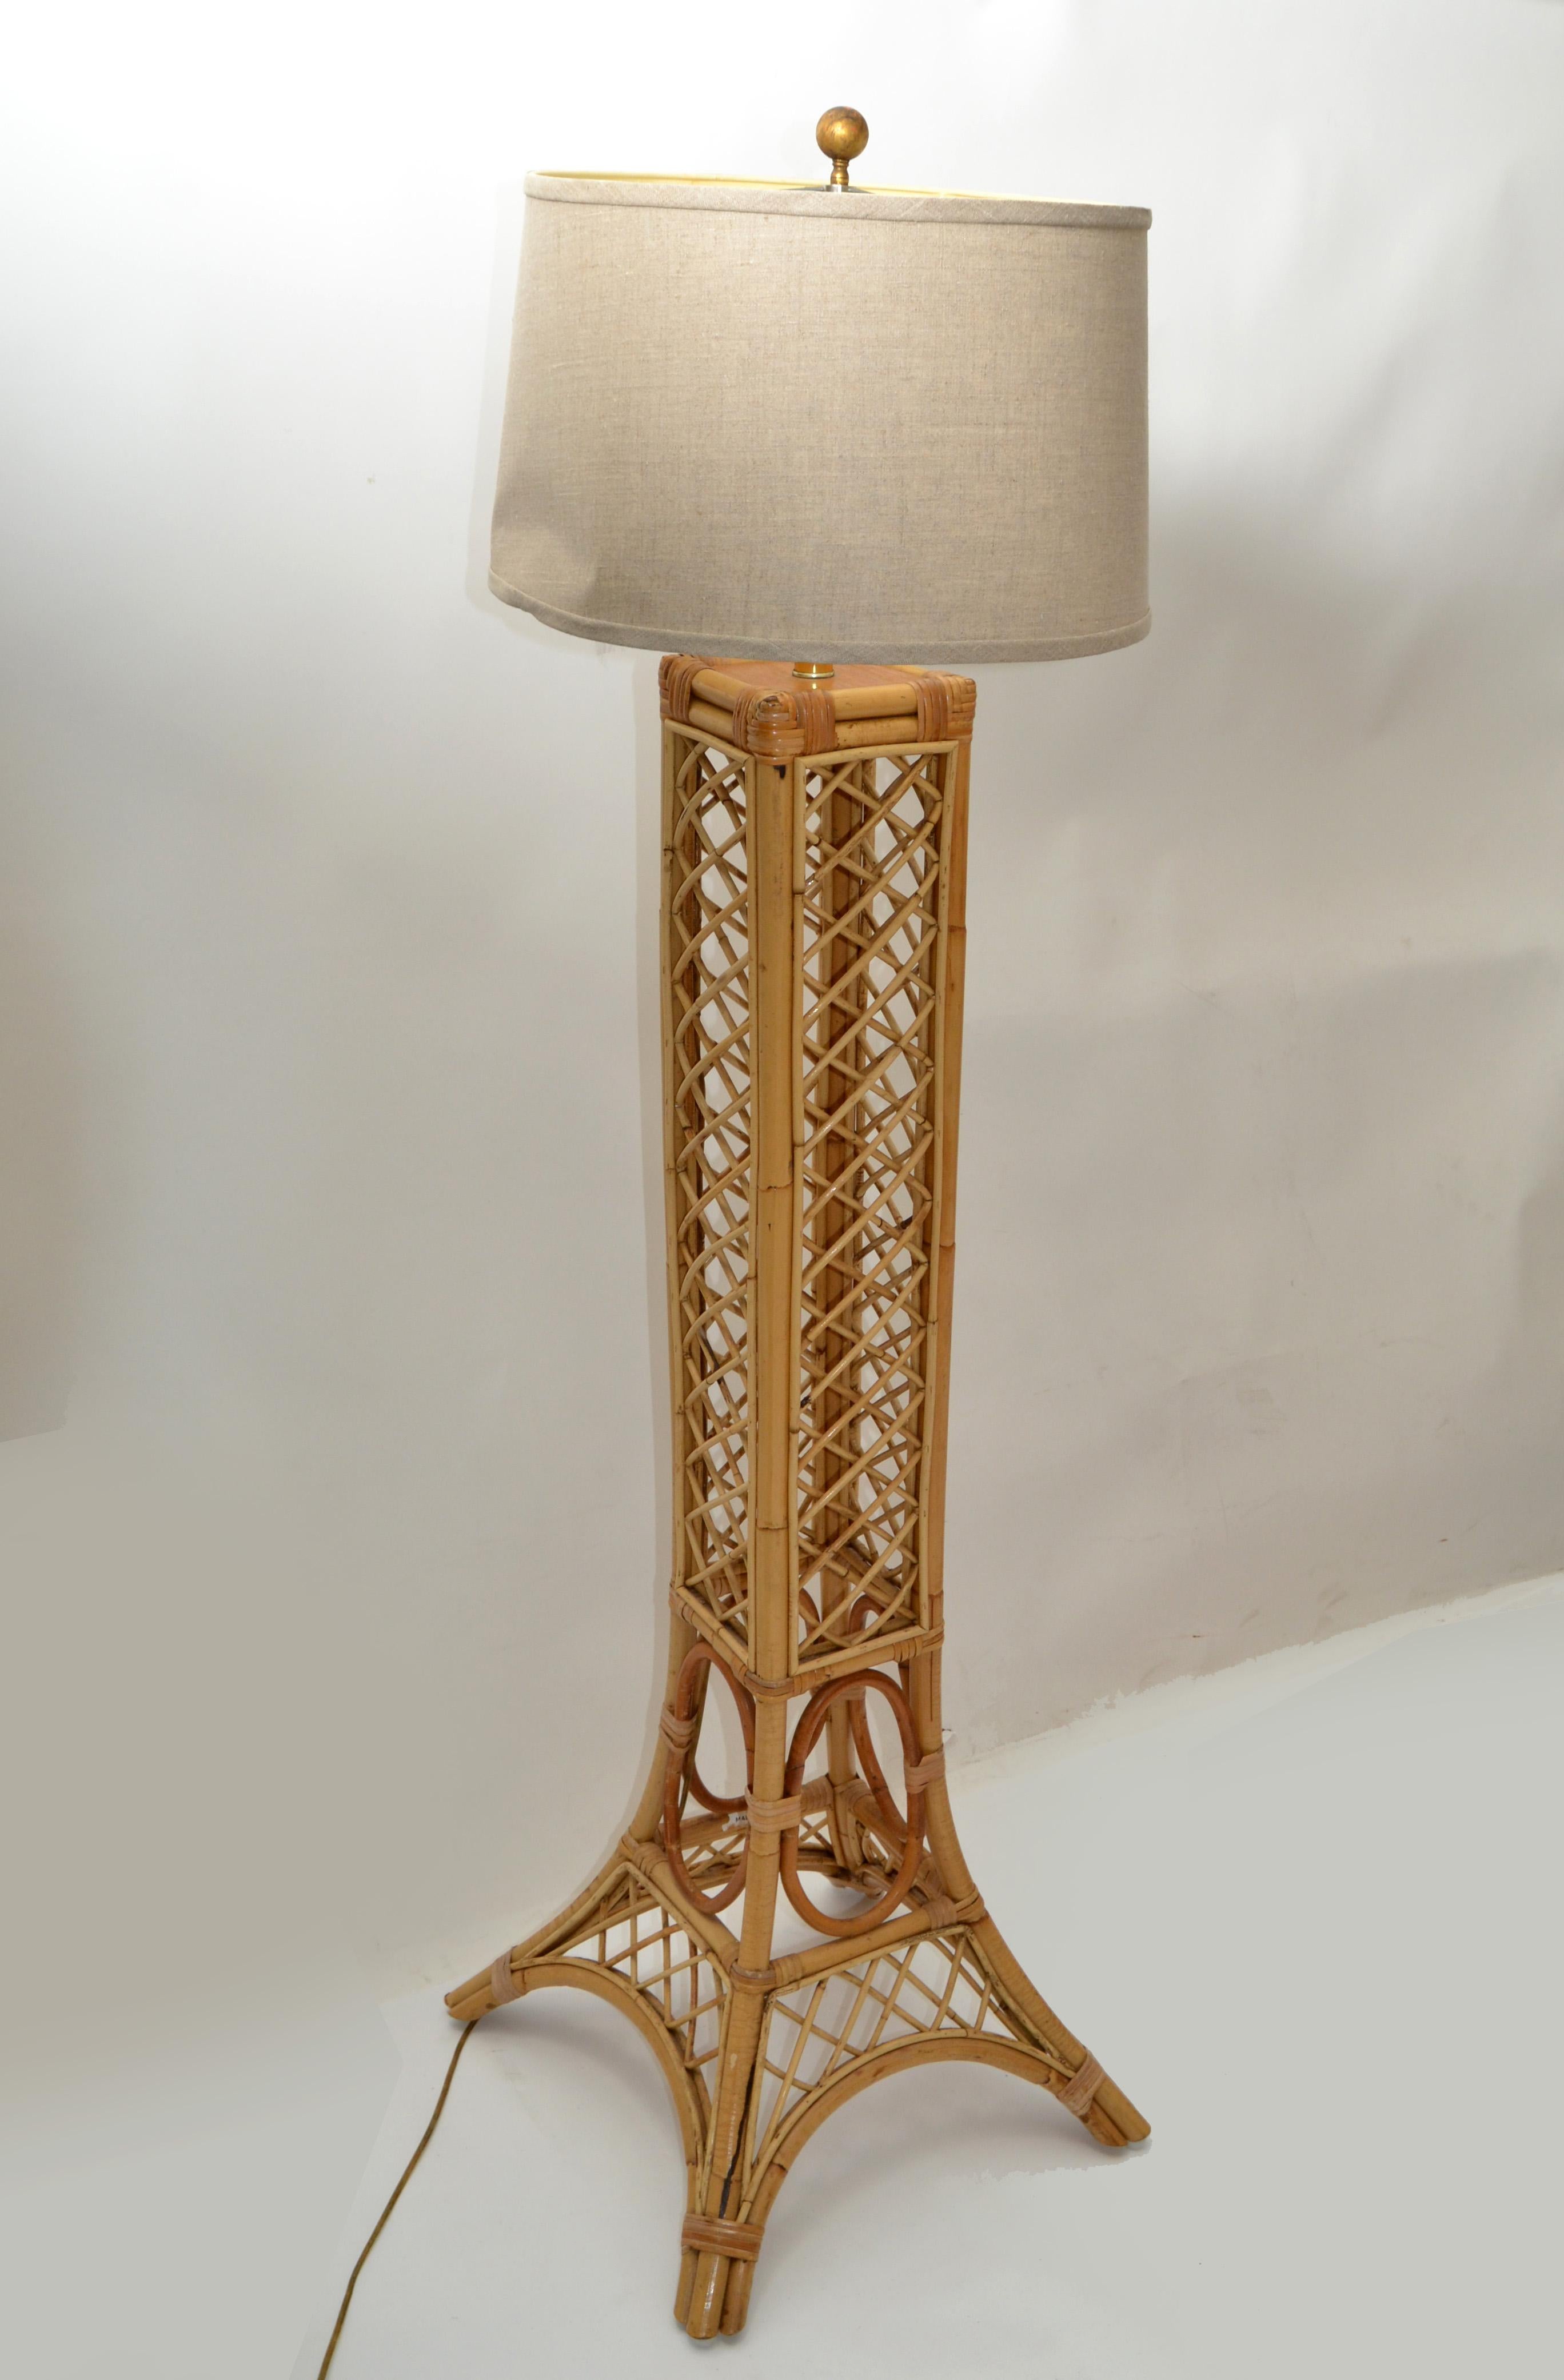 Philippine Eiffel Tower Paris Pencil Reed & Bend Bamboo Mid-Century Modern Floor Lamp 1970 For Sale